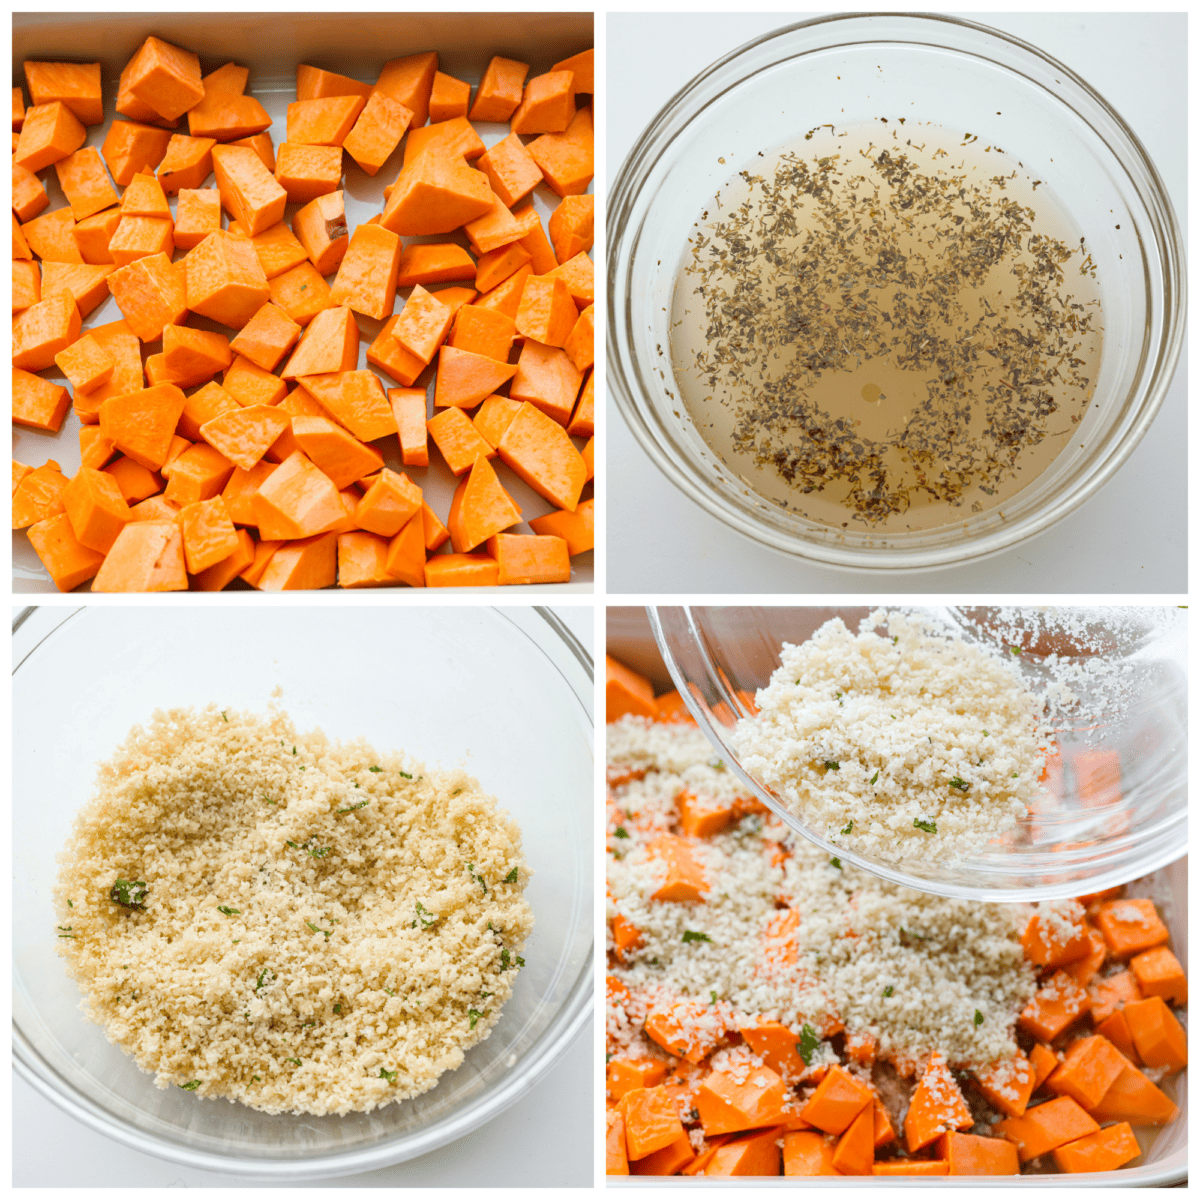 4-photo collage of the sweet potatoes being prepared and covered with breadcrumbs.